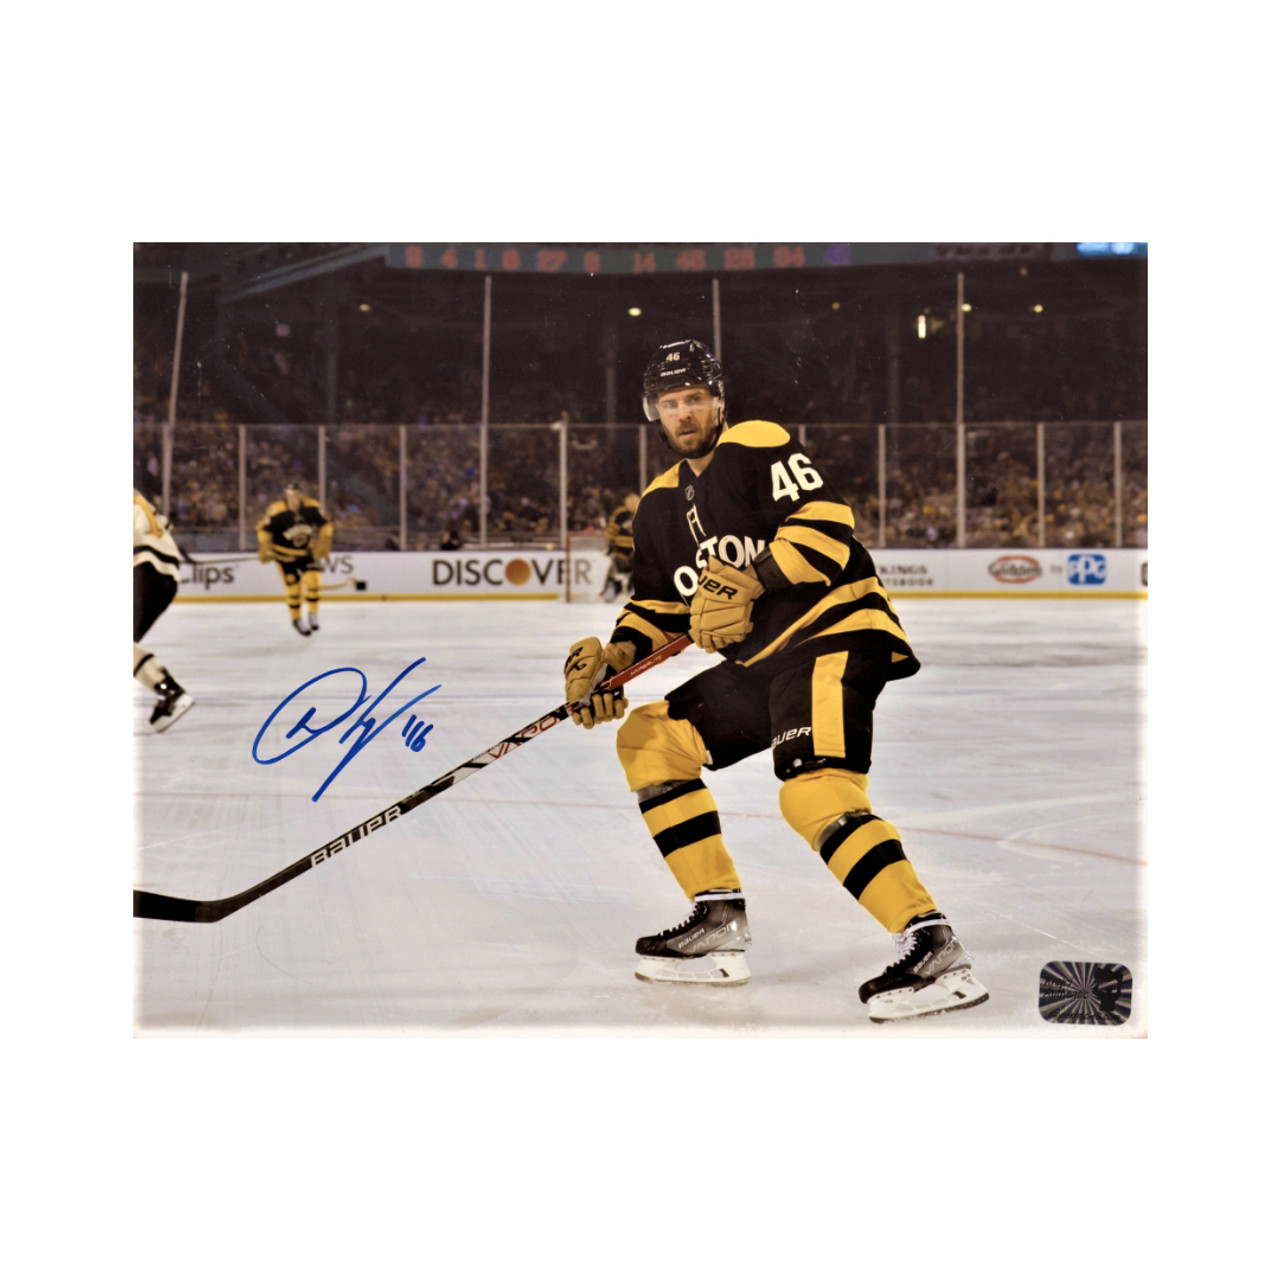 Brad Marchand and David Pastrnak Signed / Autographed Photo 8x10 Frame